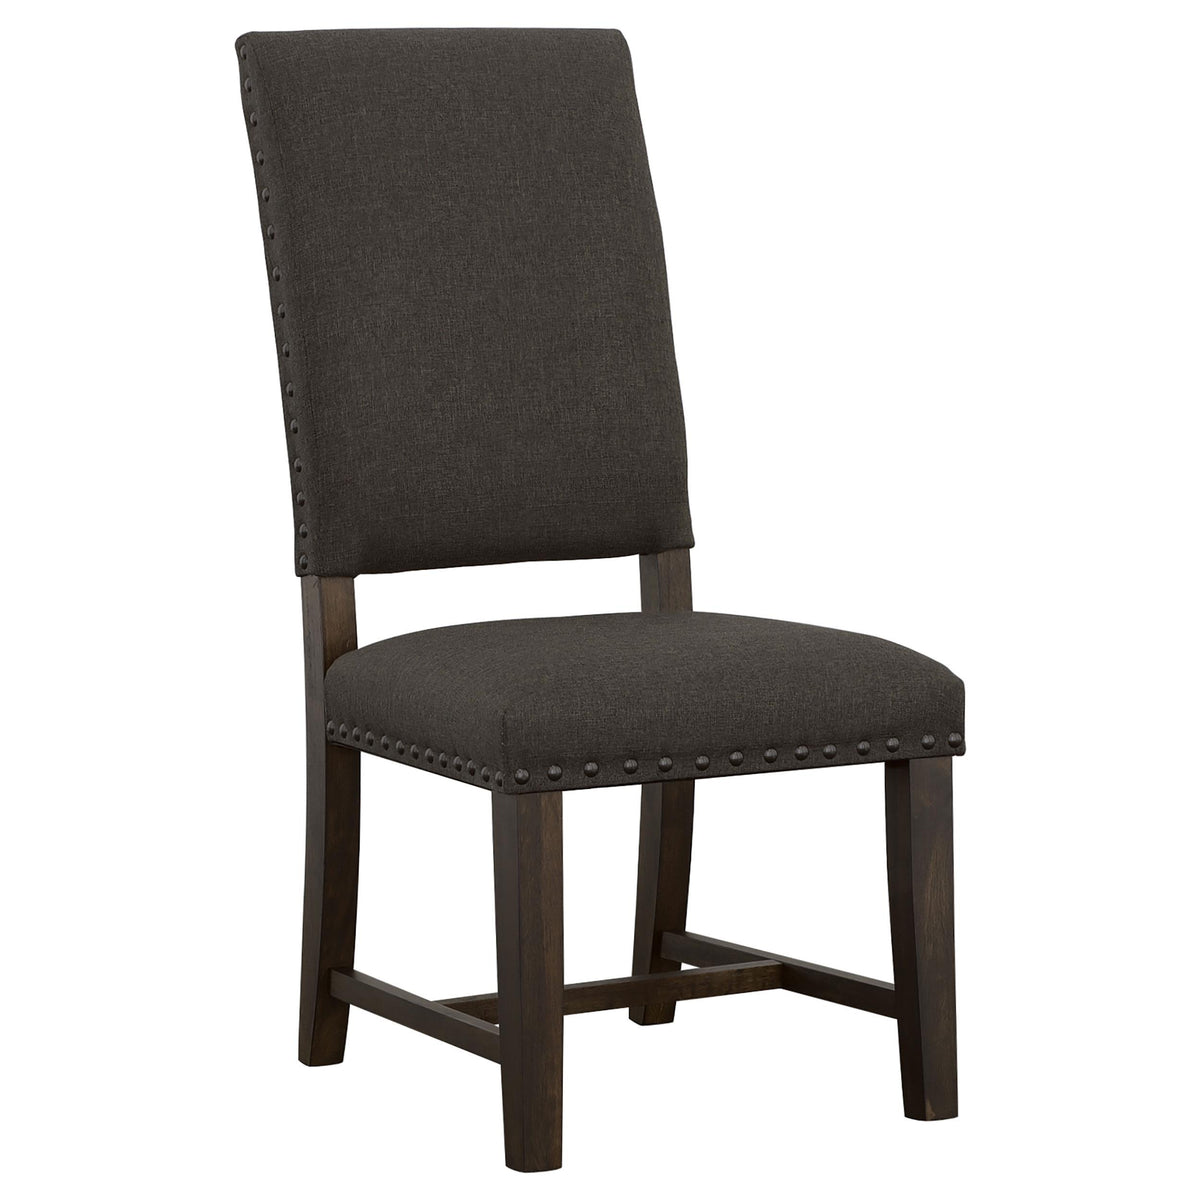 Twain Upholstered Side Chairs Warm Grey (Set of 2)  Las Vegas Furniture Stores